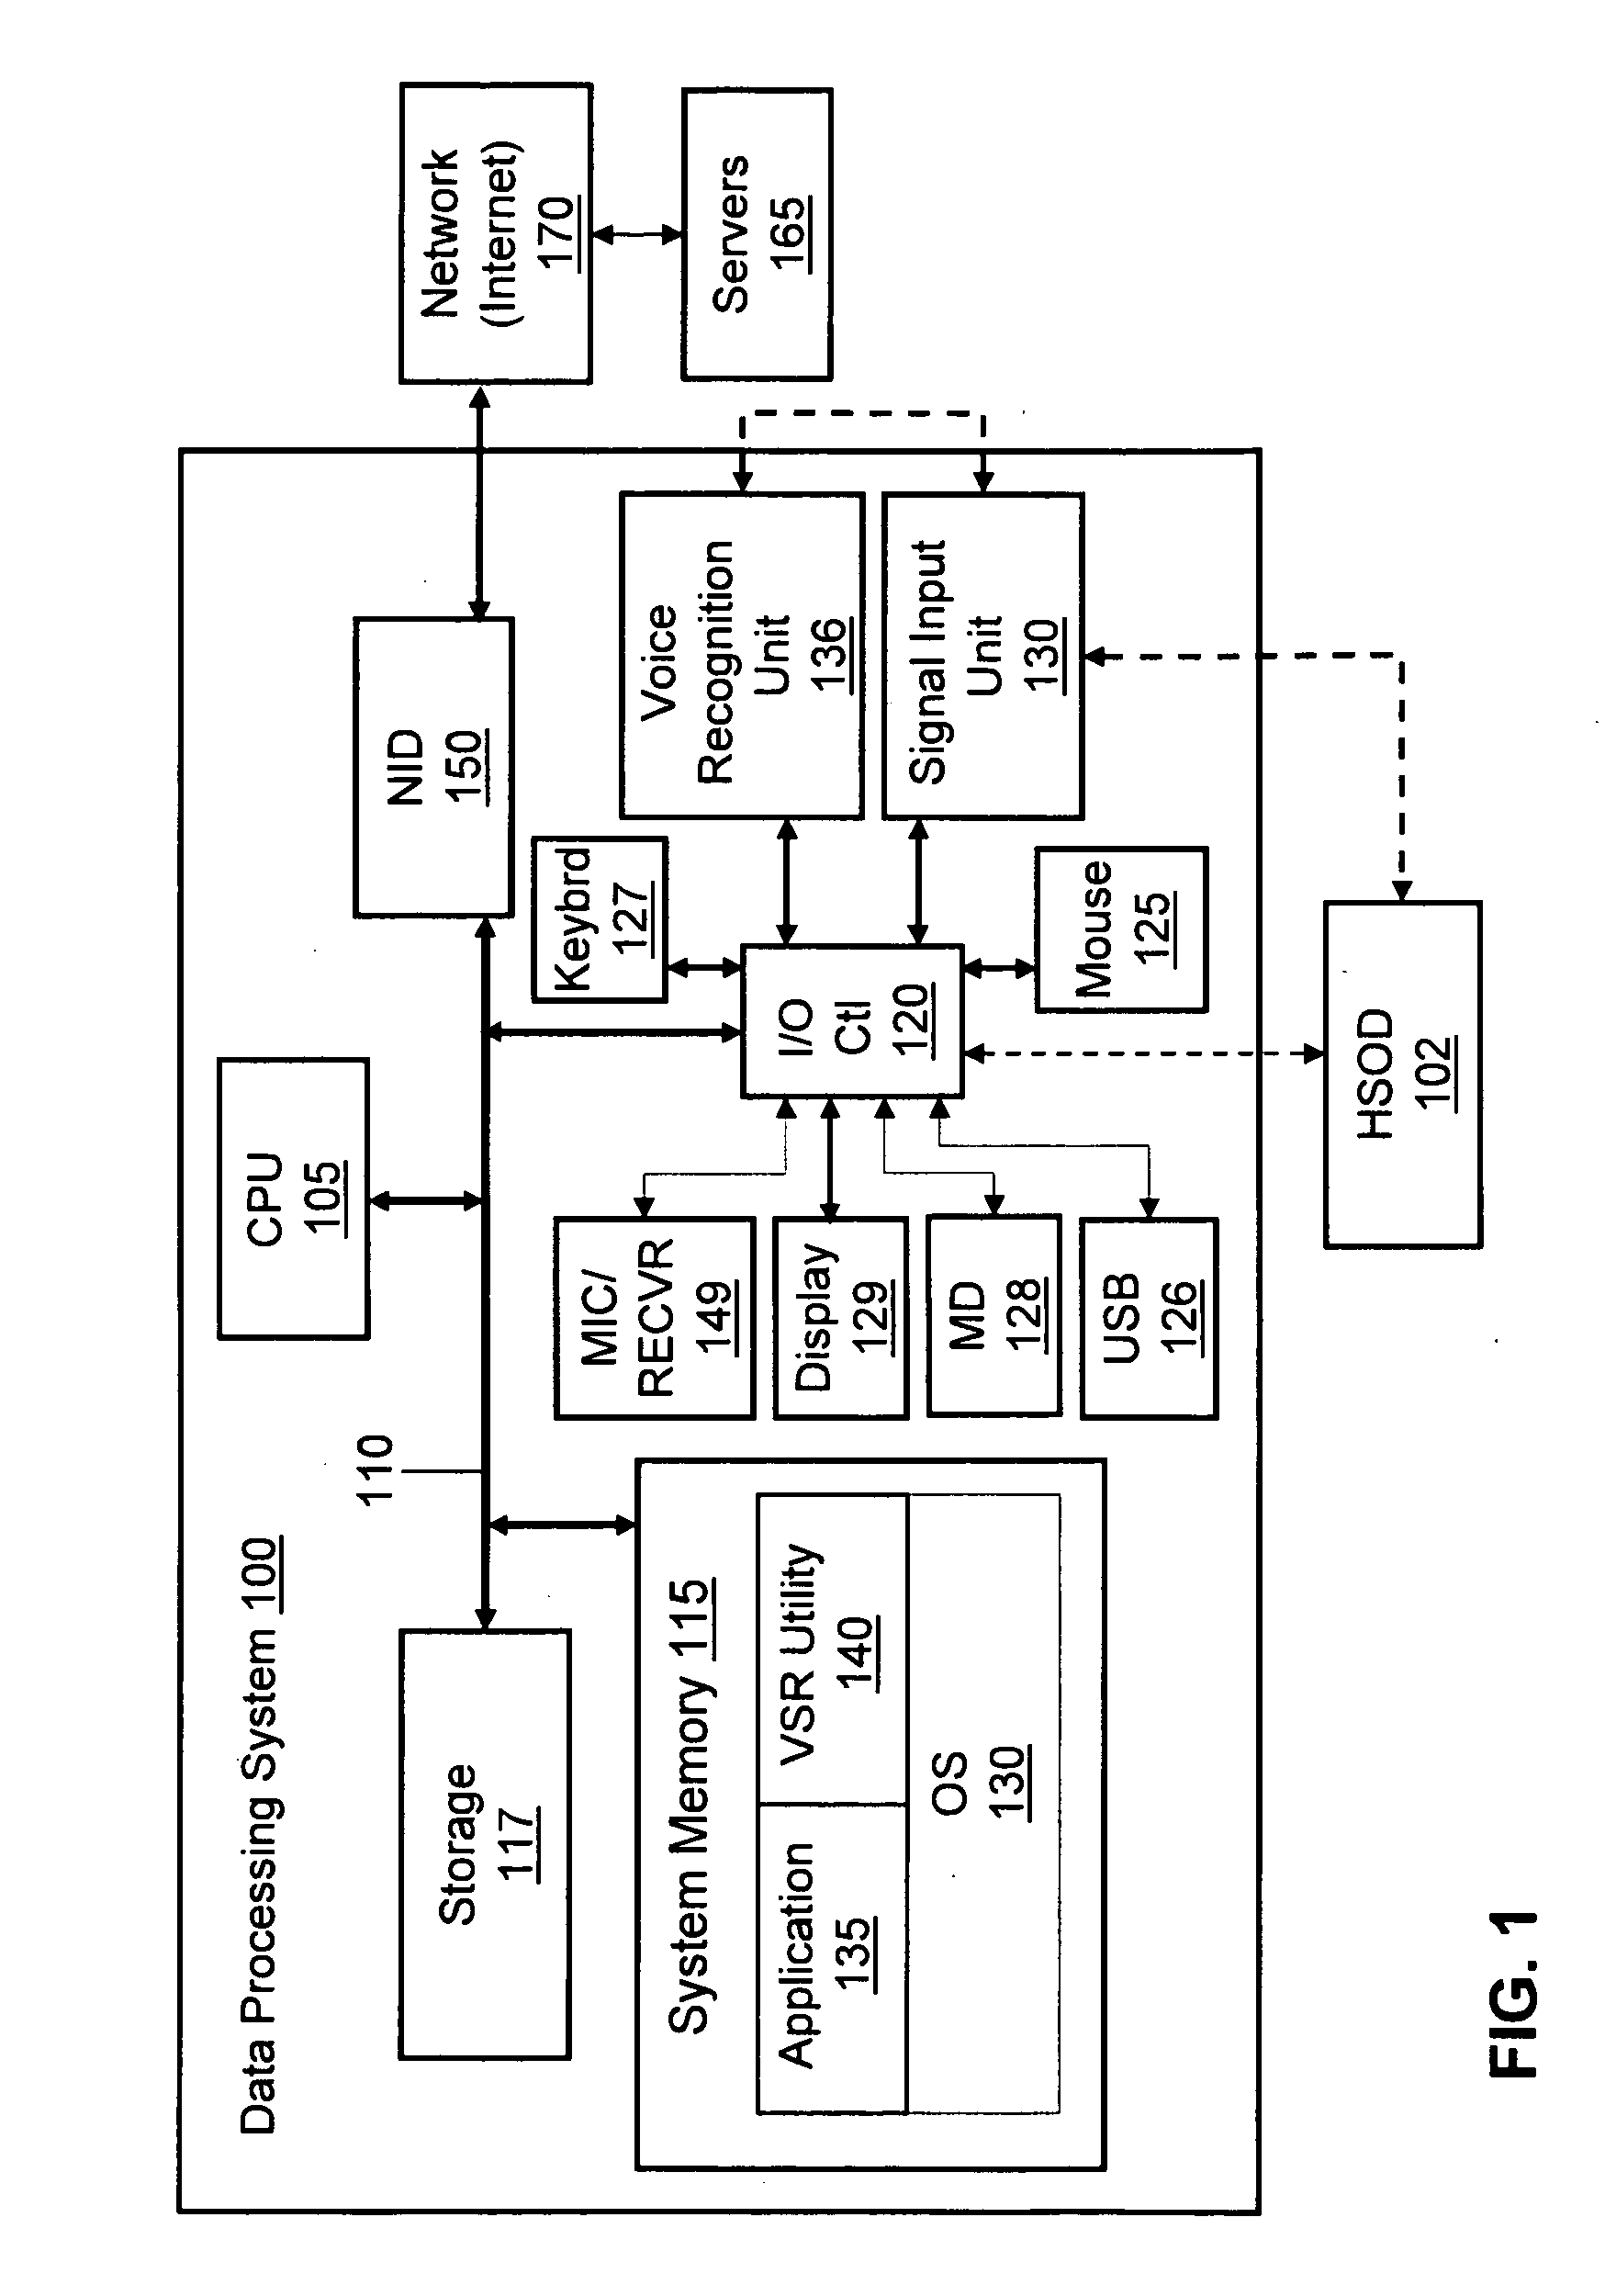 Method for Customer Feedback Measurement in Public Places Utilizing Speech Recognition Technology